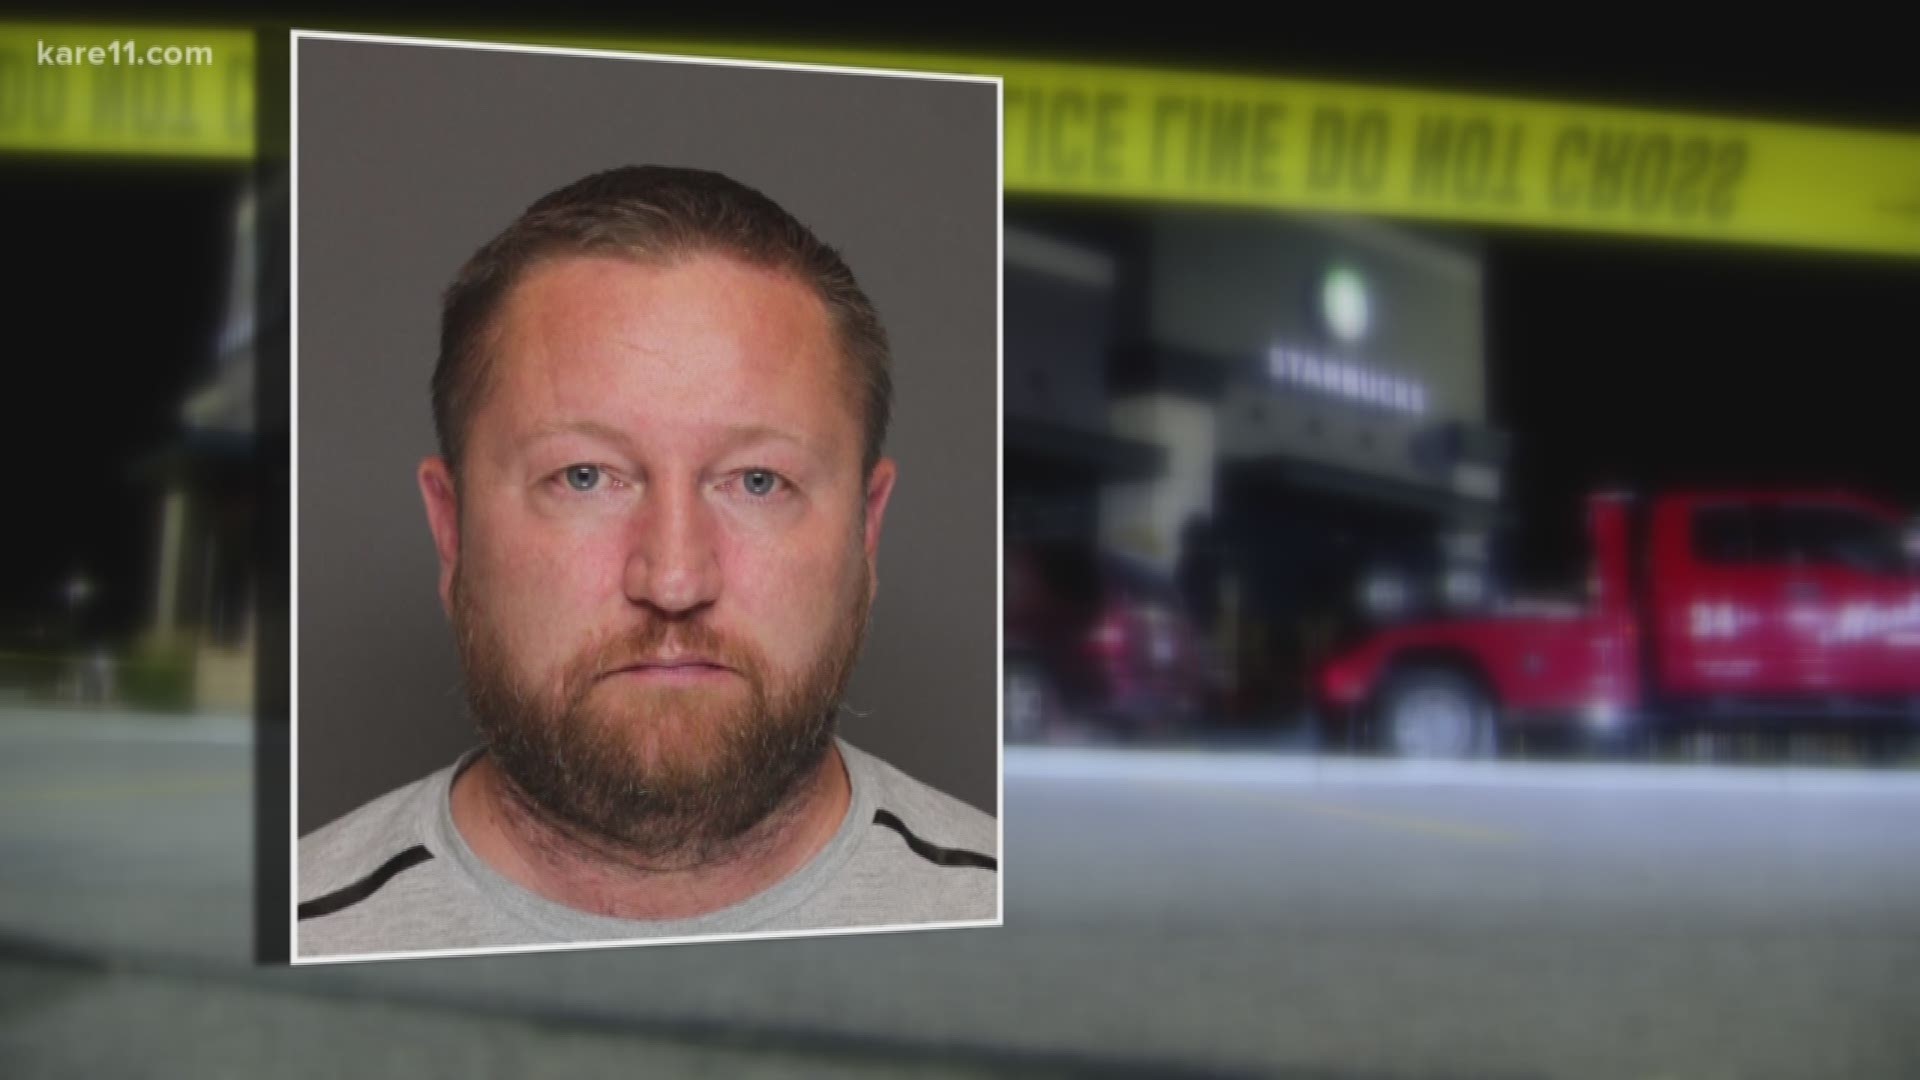 A 44-year-old Eagan man is charged after he allegedly crashed his SUV into a Starbucks while intoxicated, seriously injuring two people on the patio.